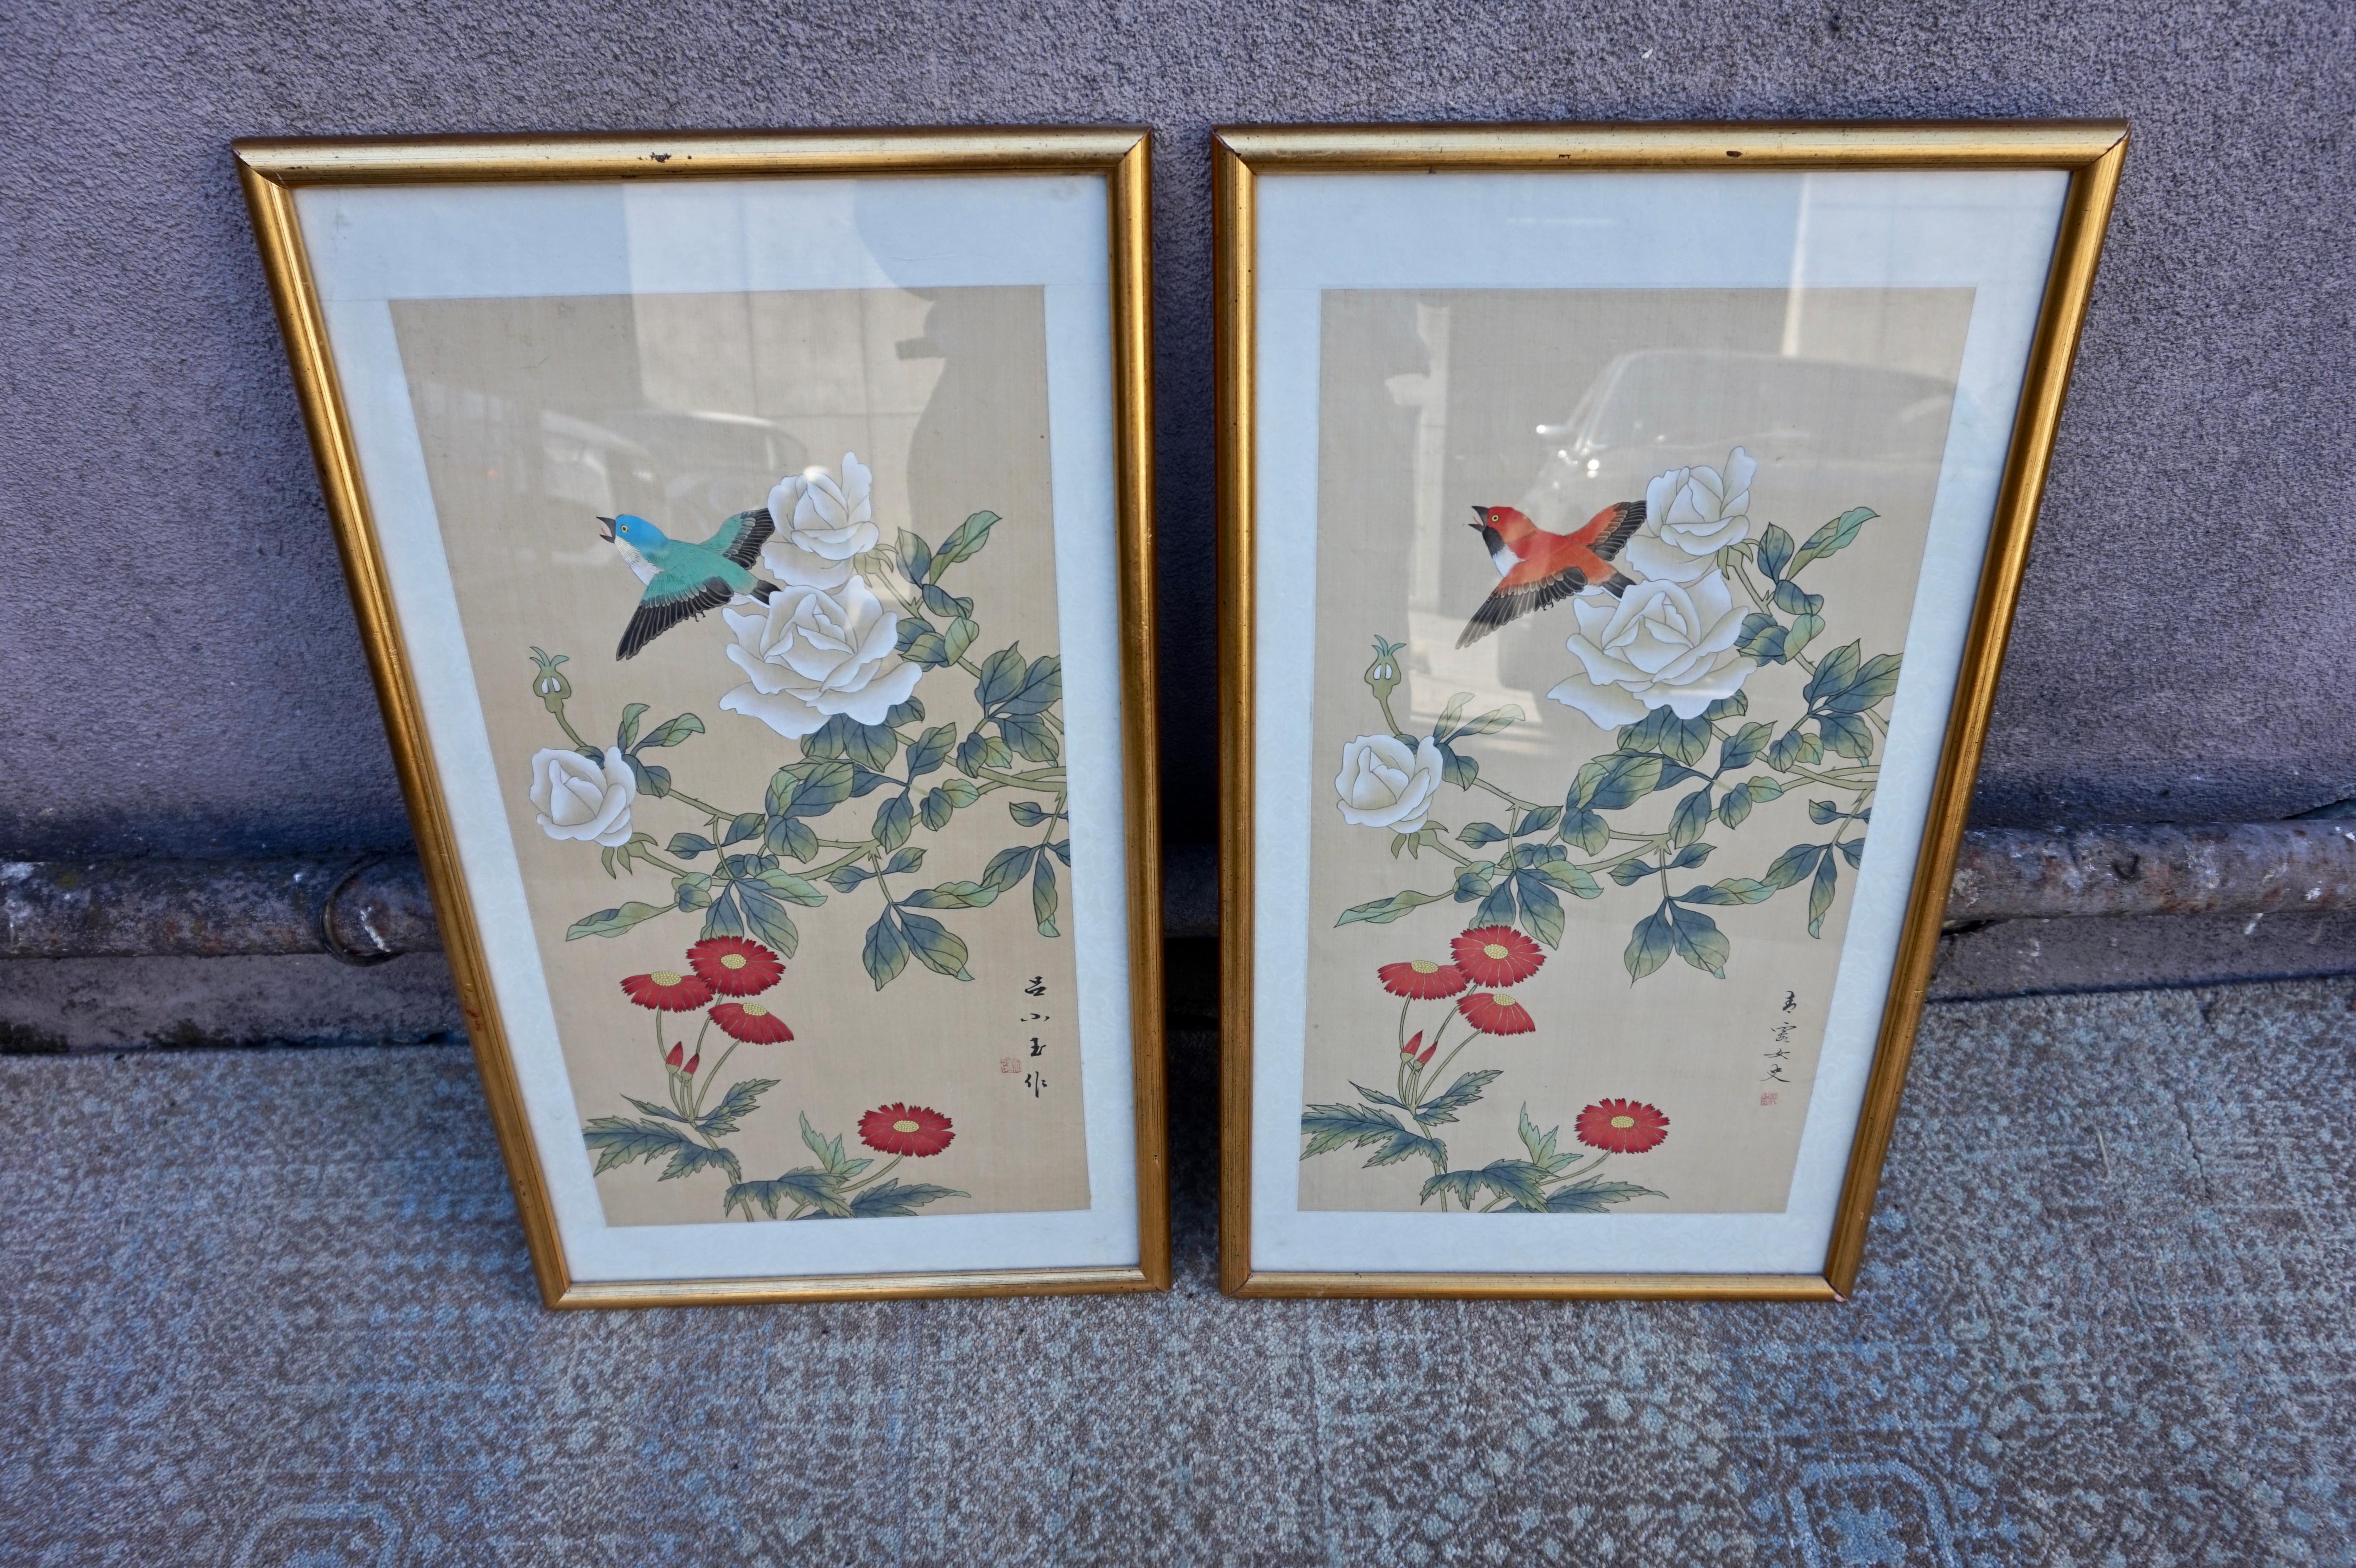 Elegant Chinese Export signed Silk paintings from the mid-century era. Excellent condition in gilt frames. Identical birds in differing hue and signature likely painted by different artists from a traditionalist school. Shows beautifully. Add some